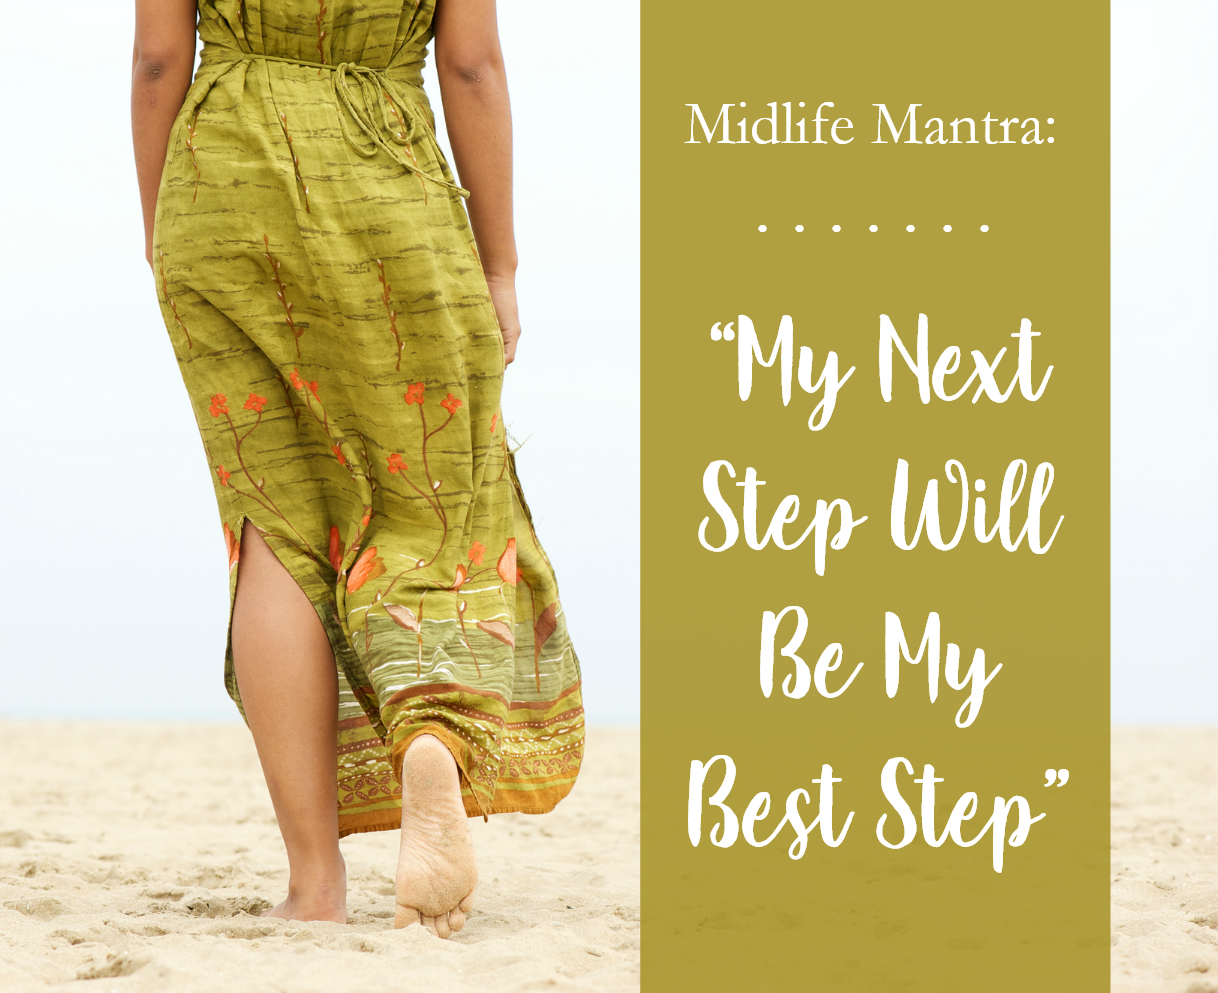 MIDLIFE MANTRA: My Next Step Will Be My Best Step